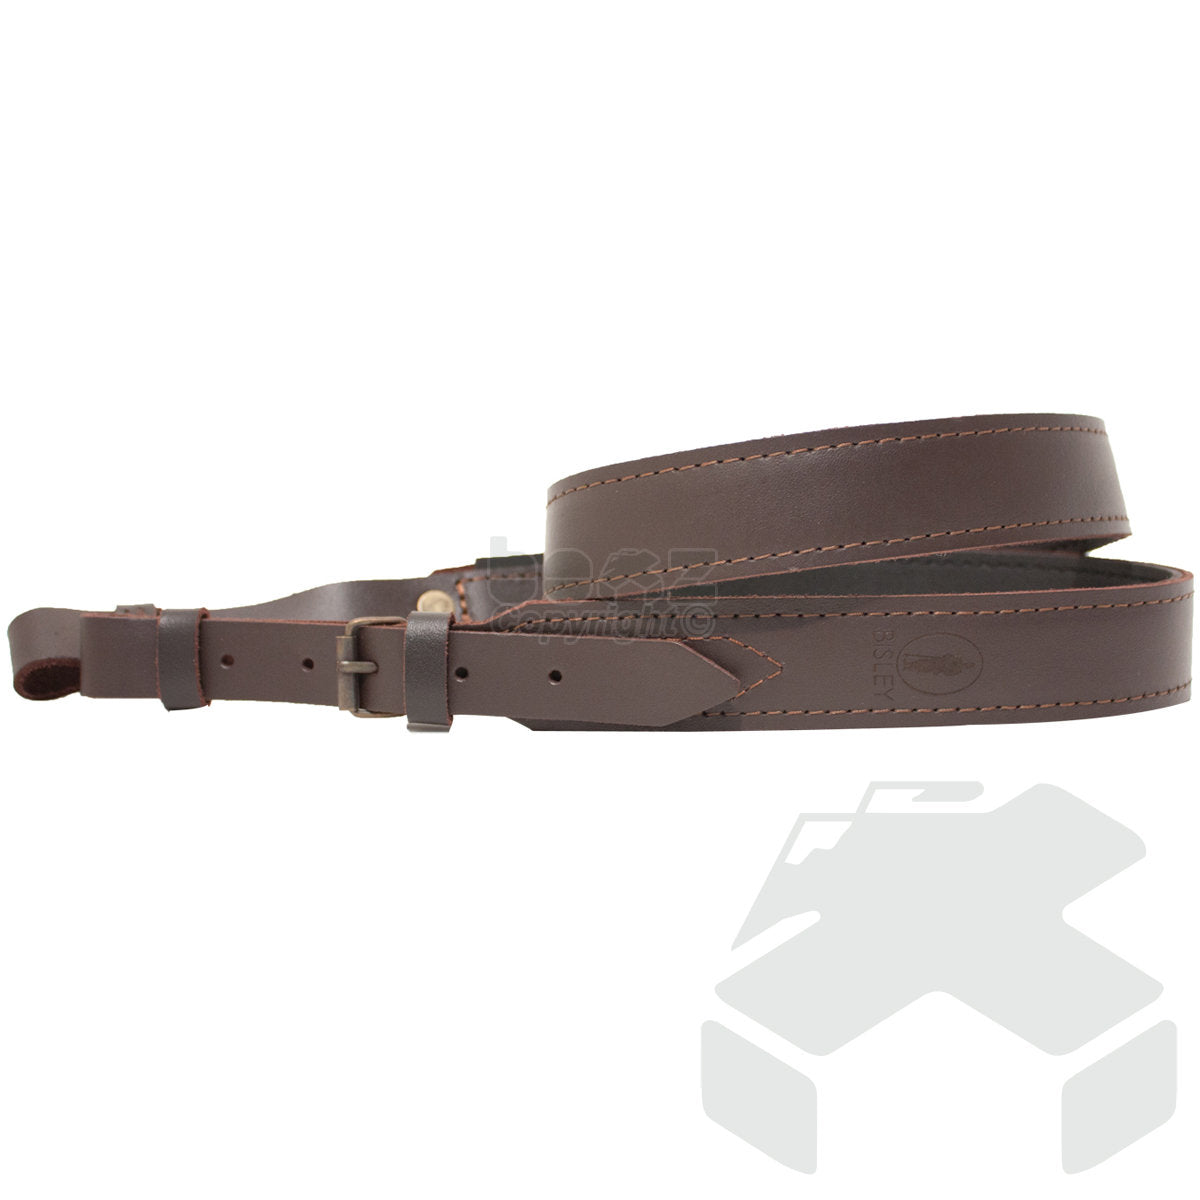 Bisley Leather Rifle Sling Rubber Lined - Non-Slip